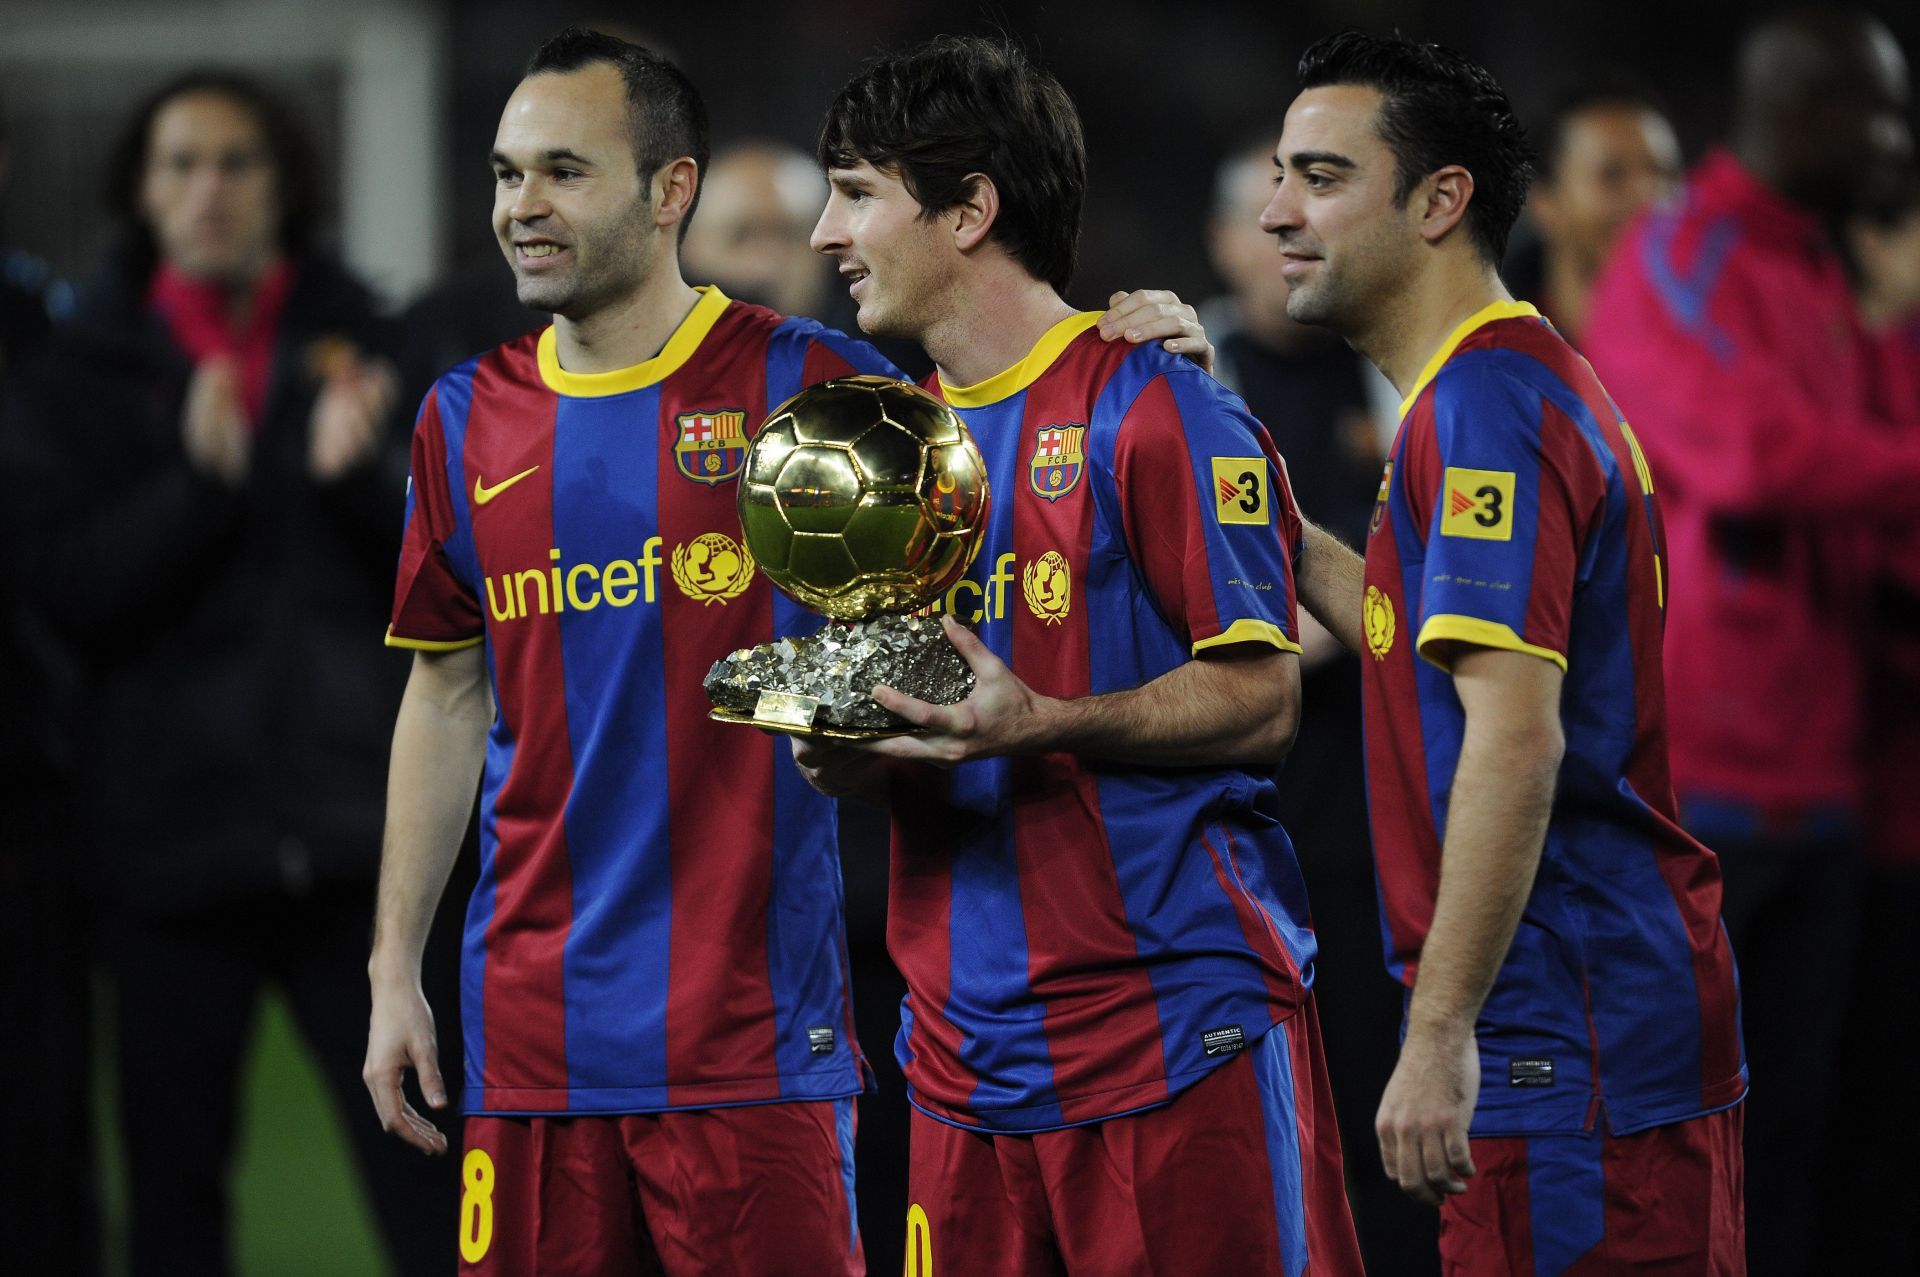 Iniesta, Messi and Xavi finished in the top 3 of the Ballon d&#039;Or rankings in 2010